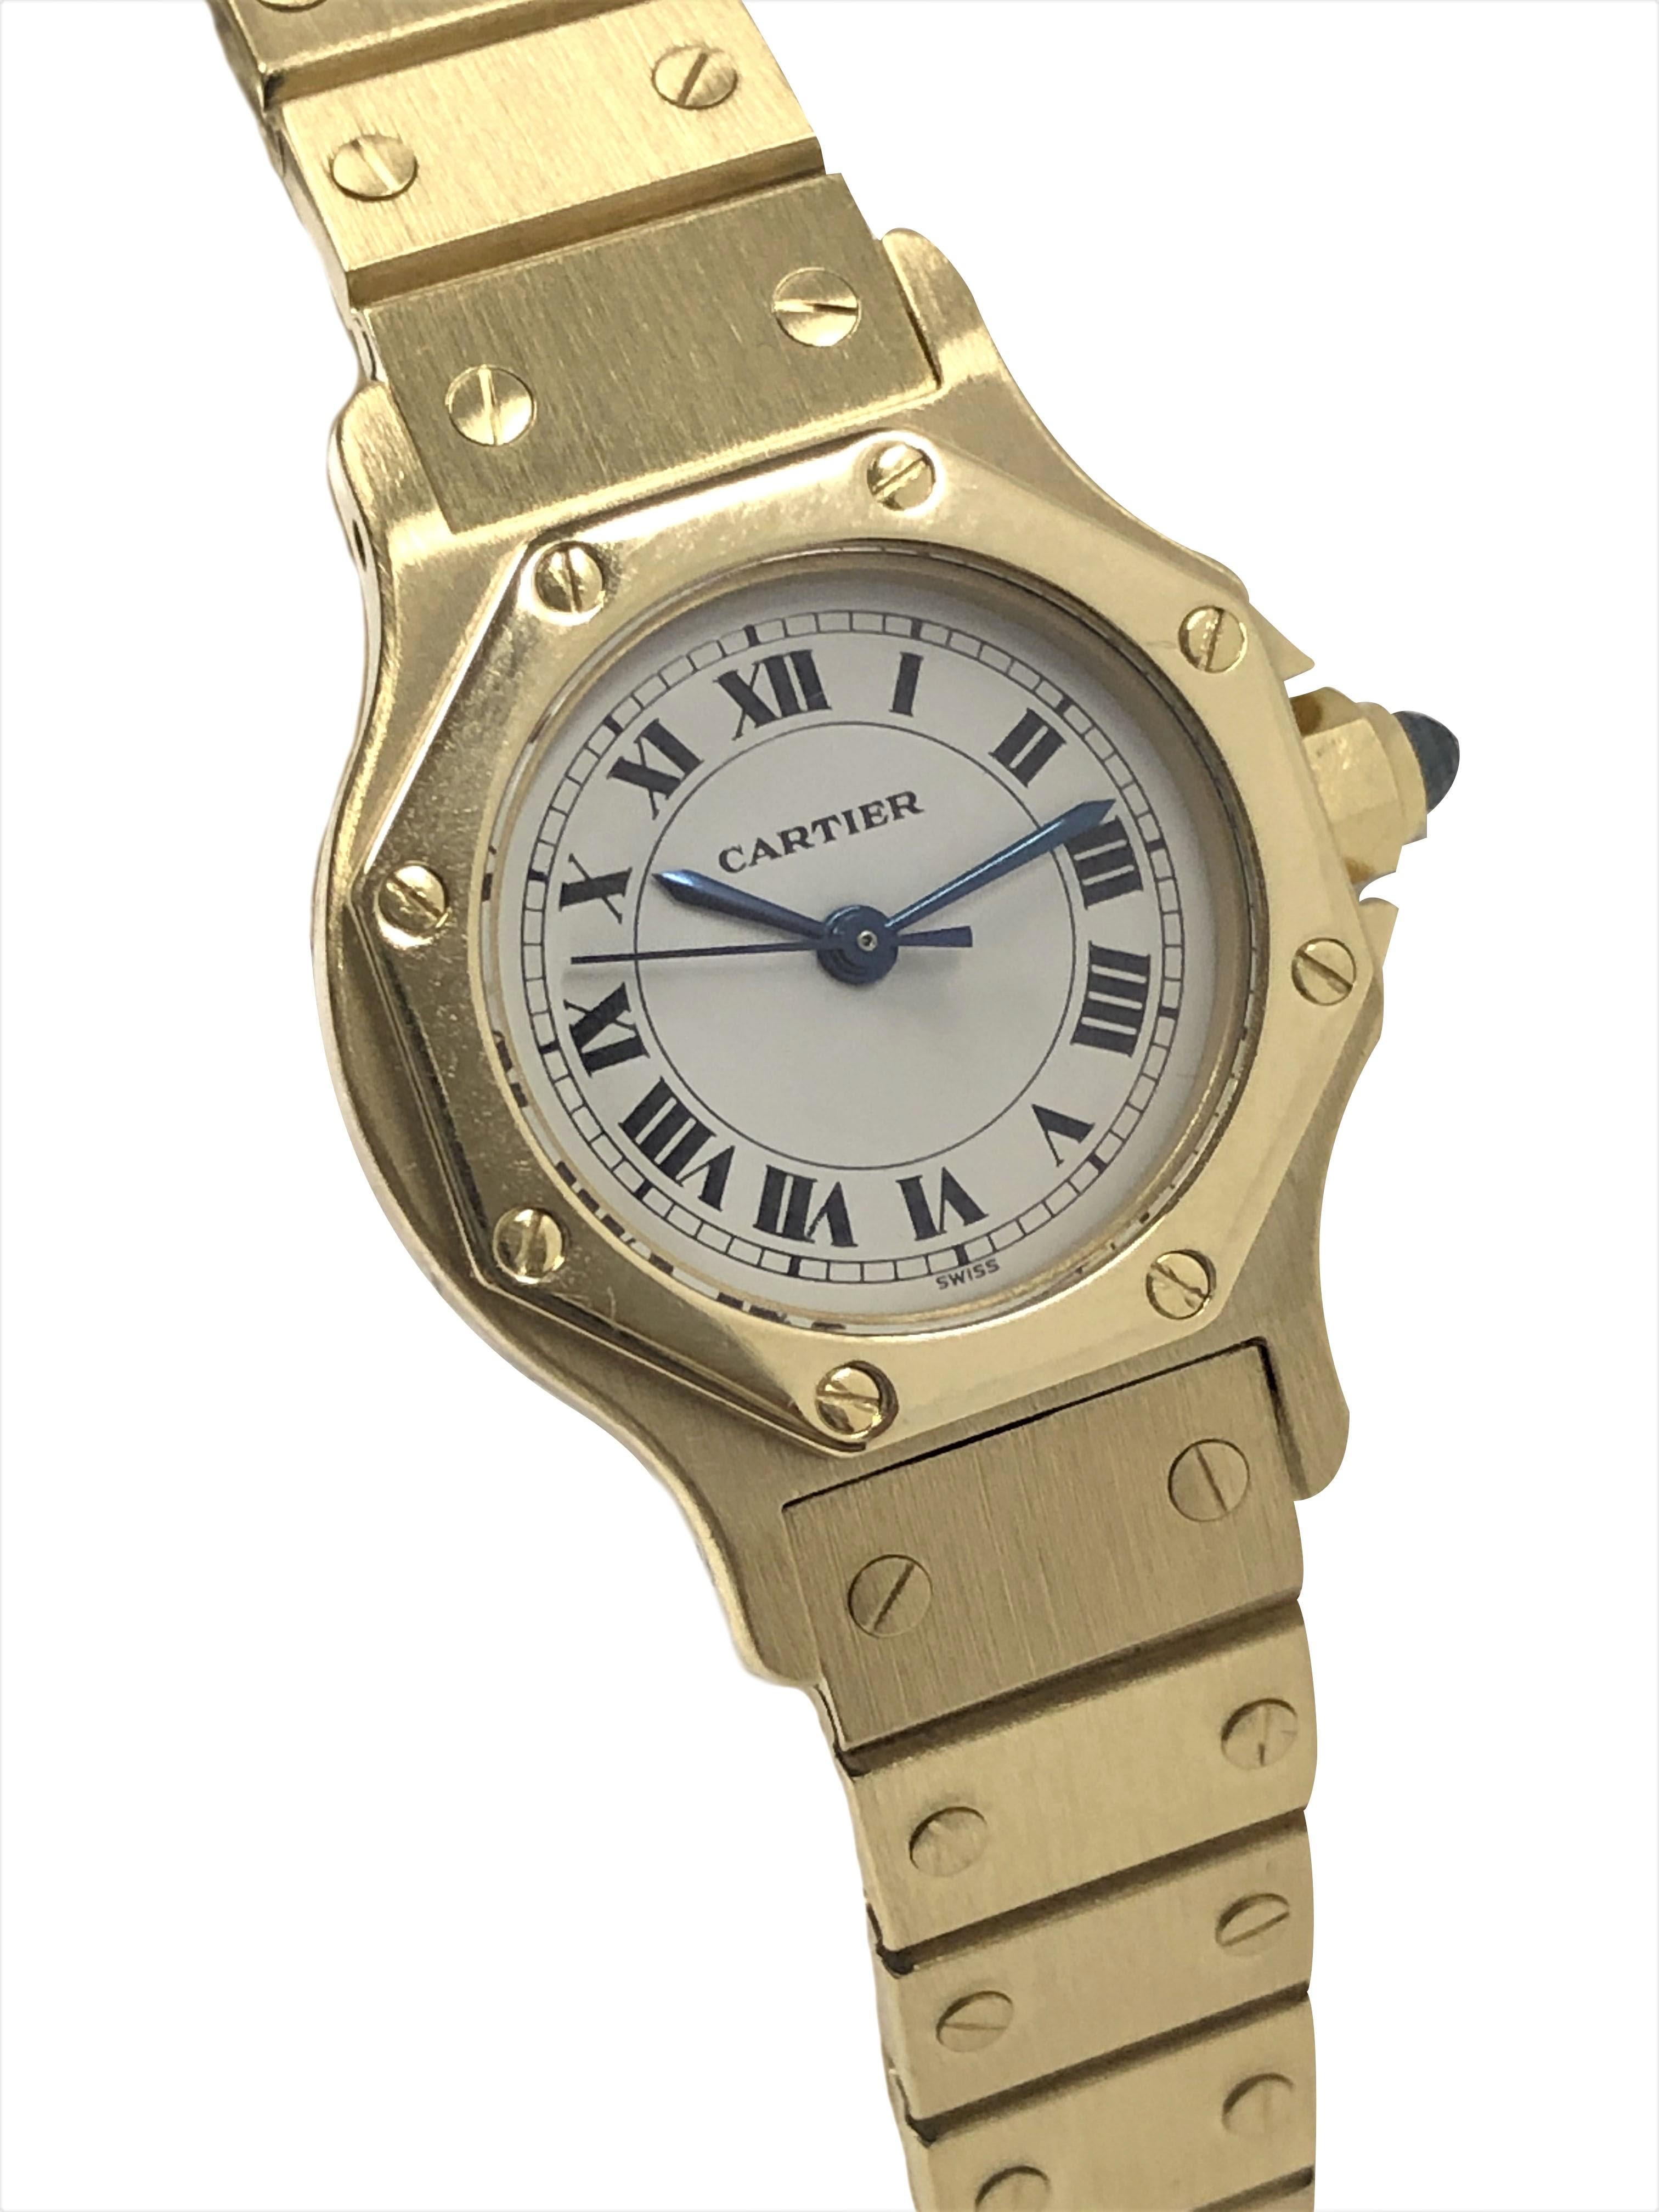 Circa 1990 Cartier Santos Collection Ladies Wrist Watch, 26 M.M. Octagon 18k Yellow Gold 2 Piece water resistant case, Automatic self winding movement, White Dial with Black Roman numerals, sweep seconds hand and a Sapphire crown. 1/2 inch wide